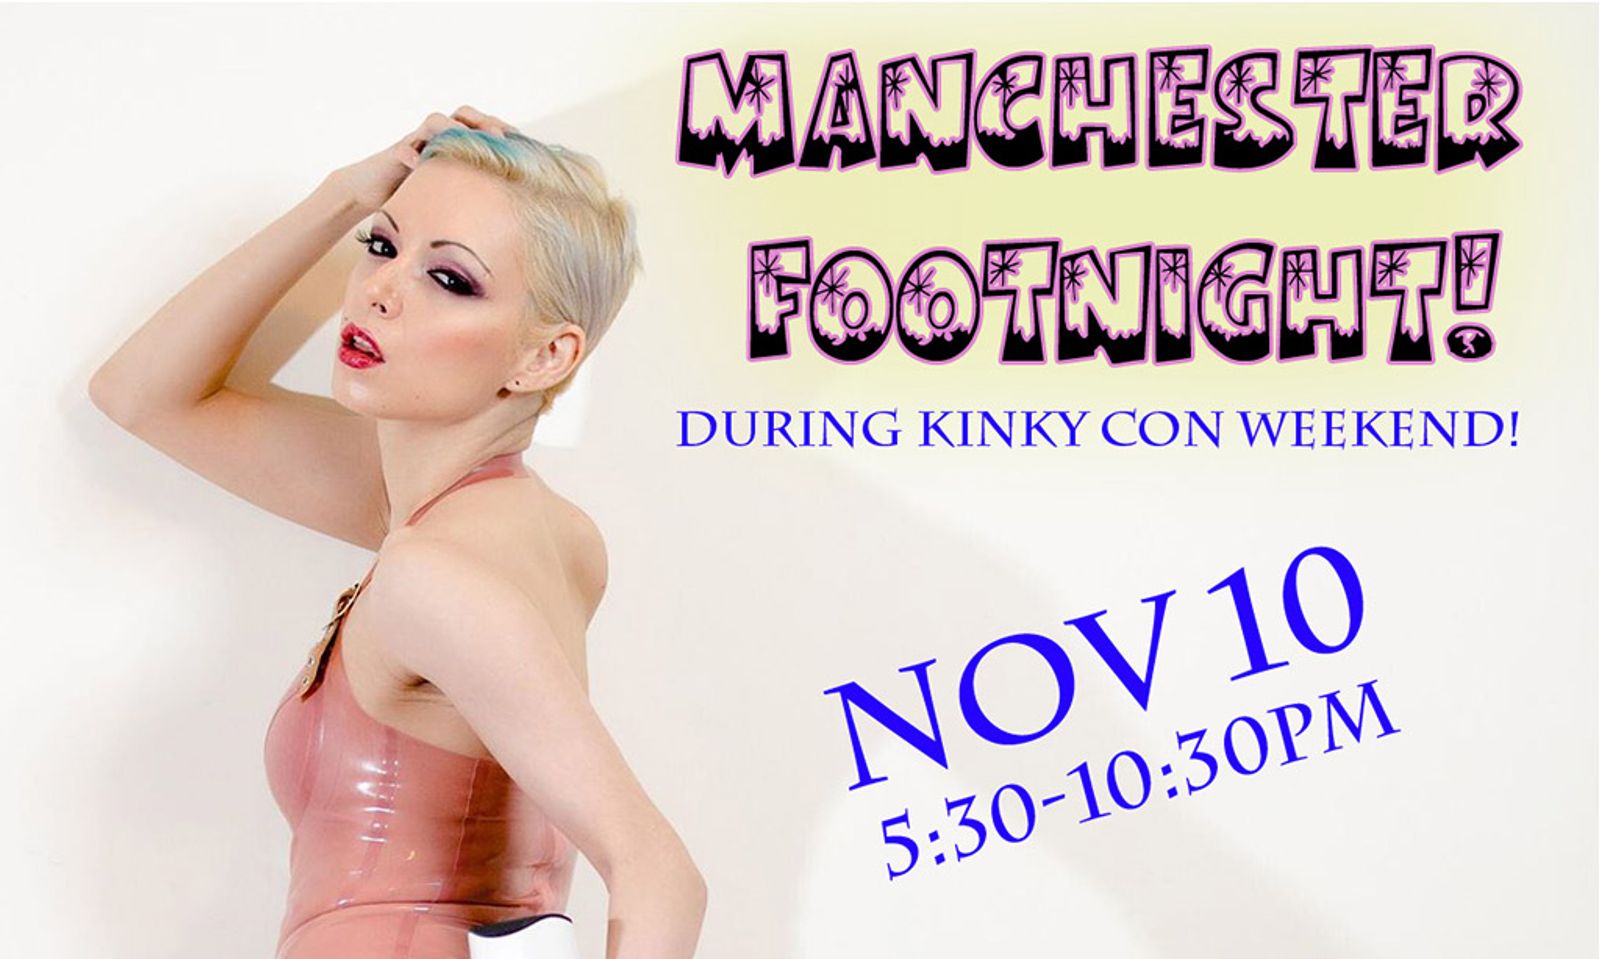 Goddess Lilith Throws New Hampshire’s First Footnight Party